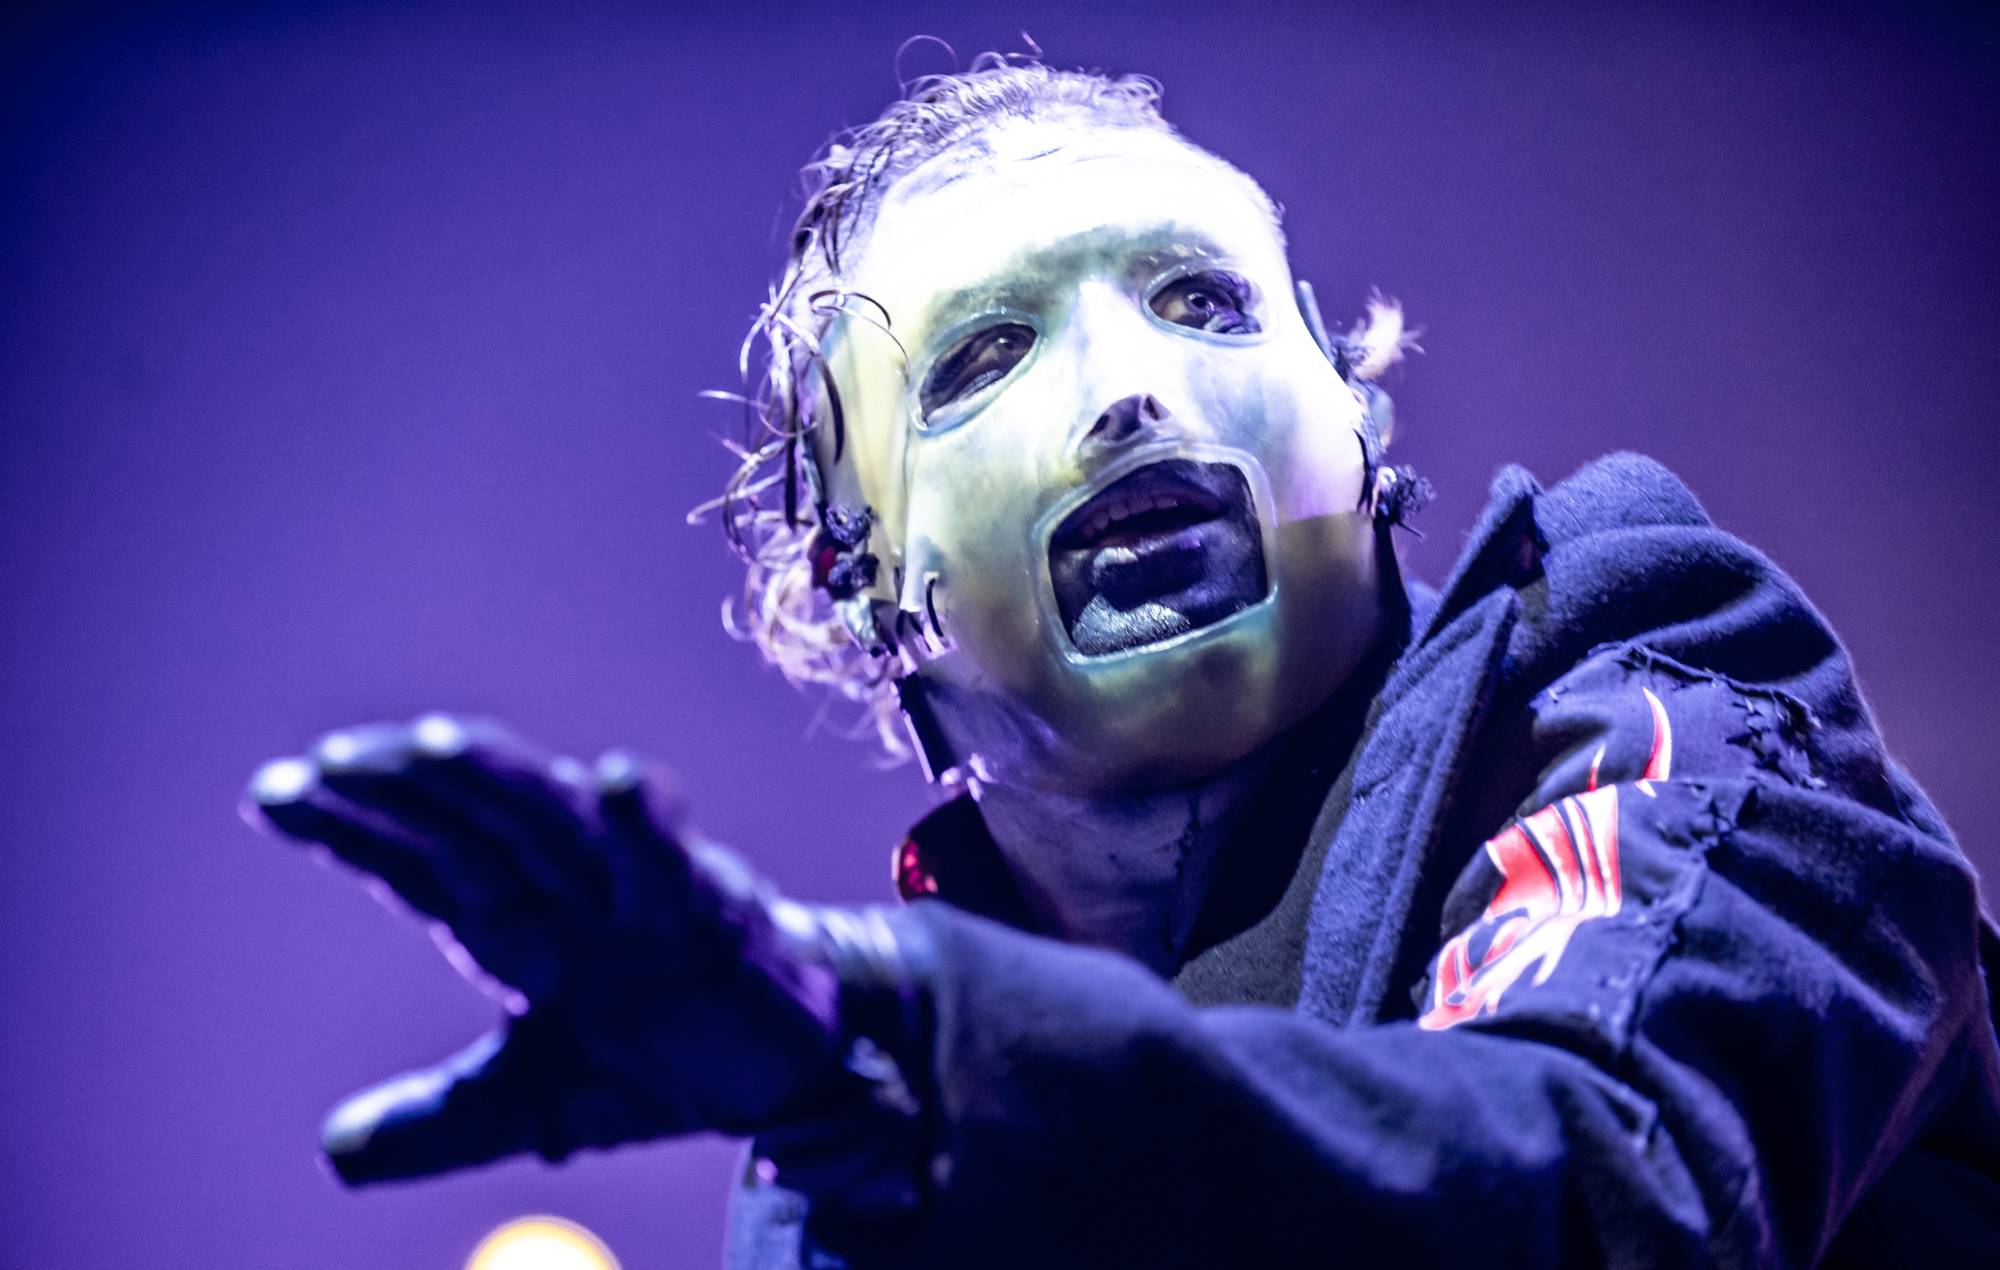 COREY TAYLOR On New SLIPKNOT Album: “It’s An Expansion Of Where We Were At On ‘We Are Not Your Kind’.